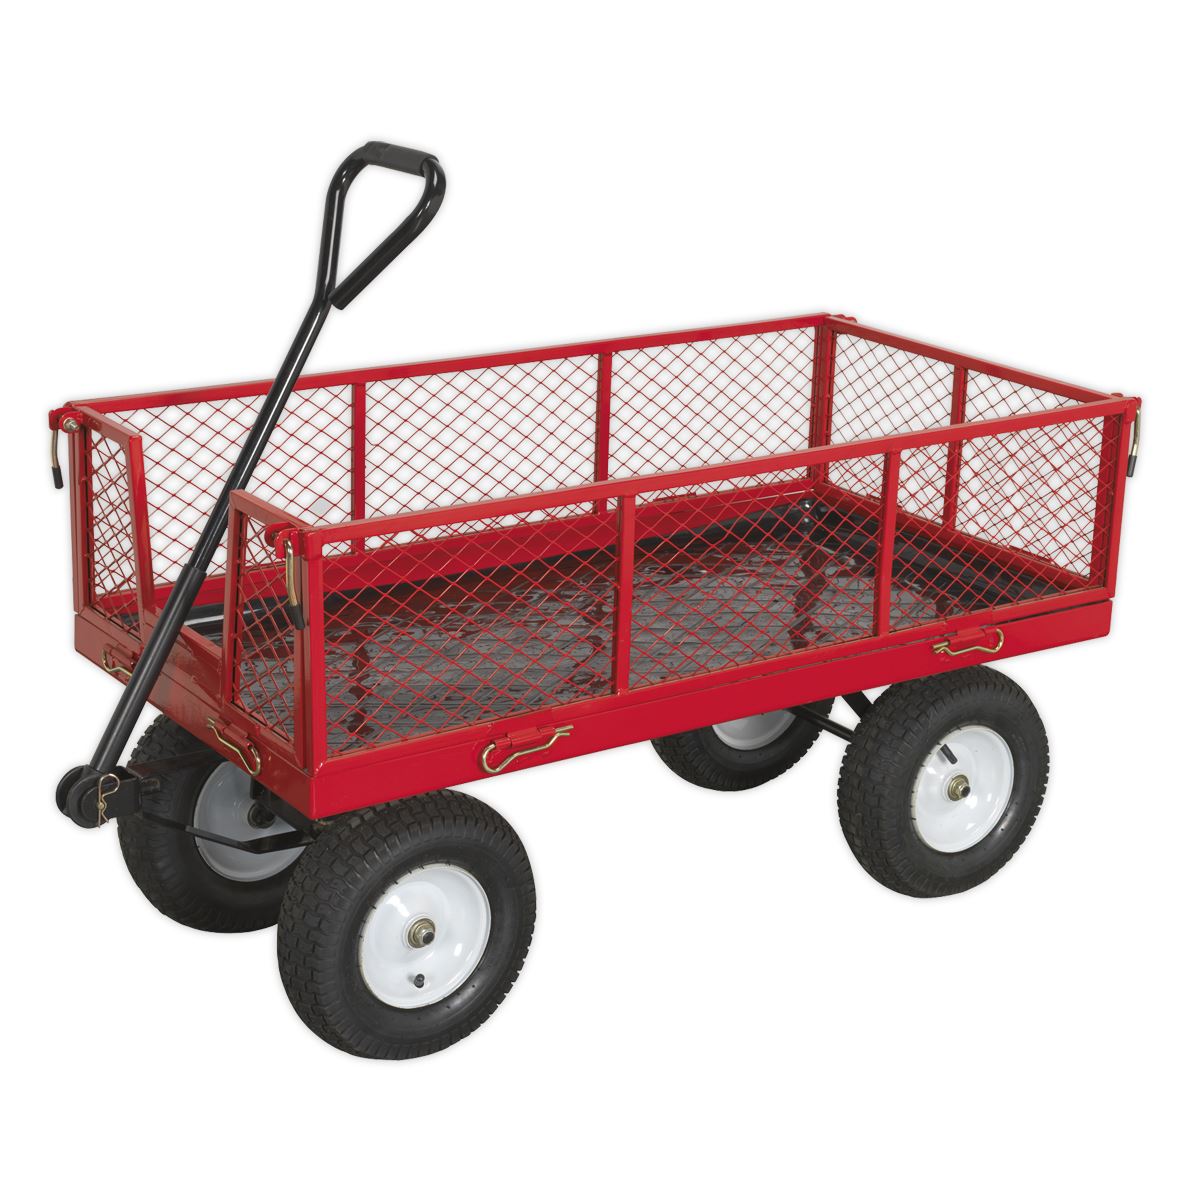 Sealey Platform Truck with Sides Pneumatic Tyres 450kg Capacity